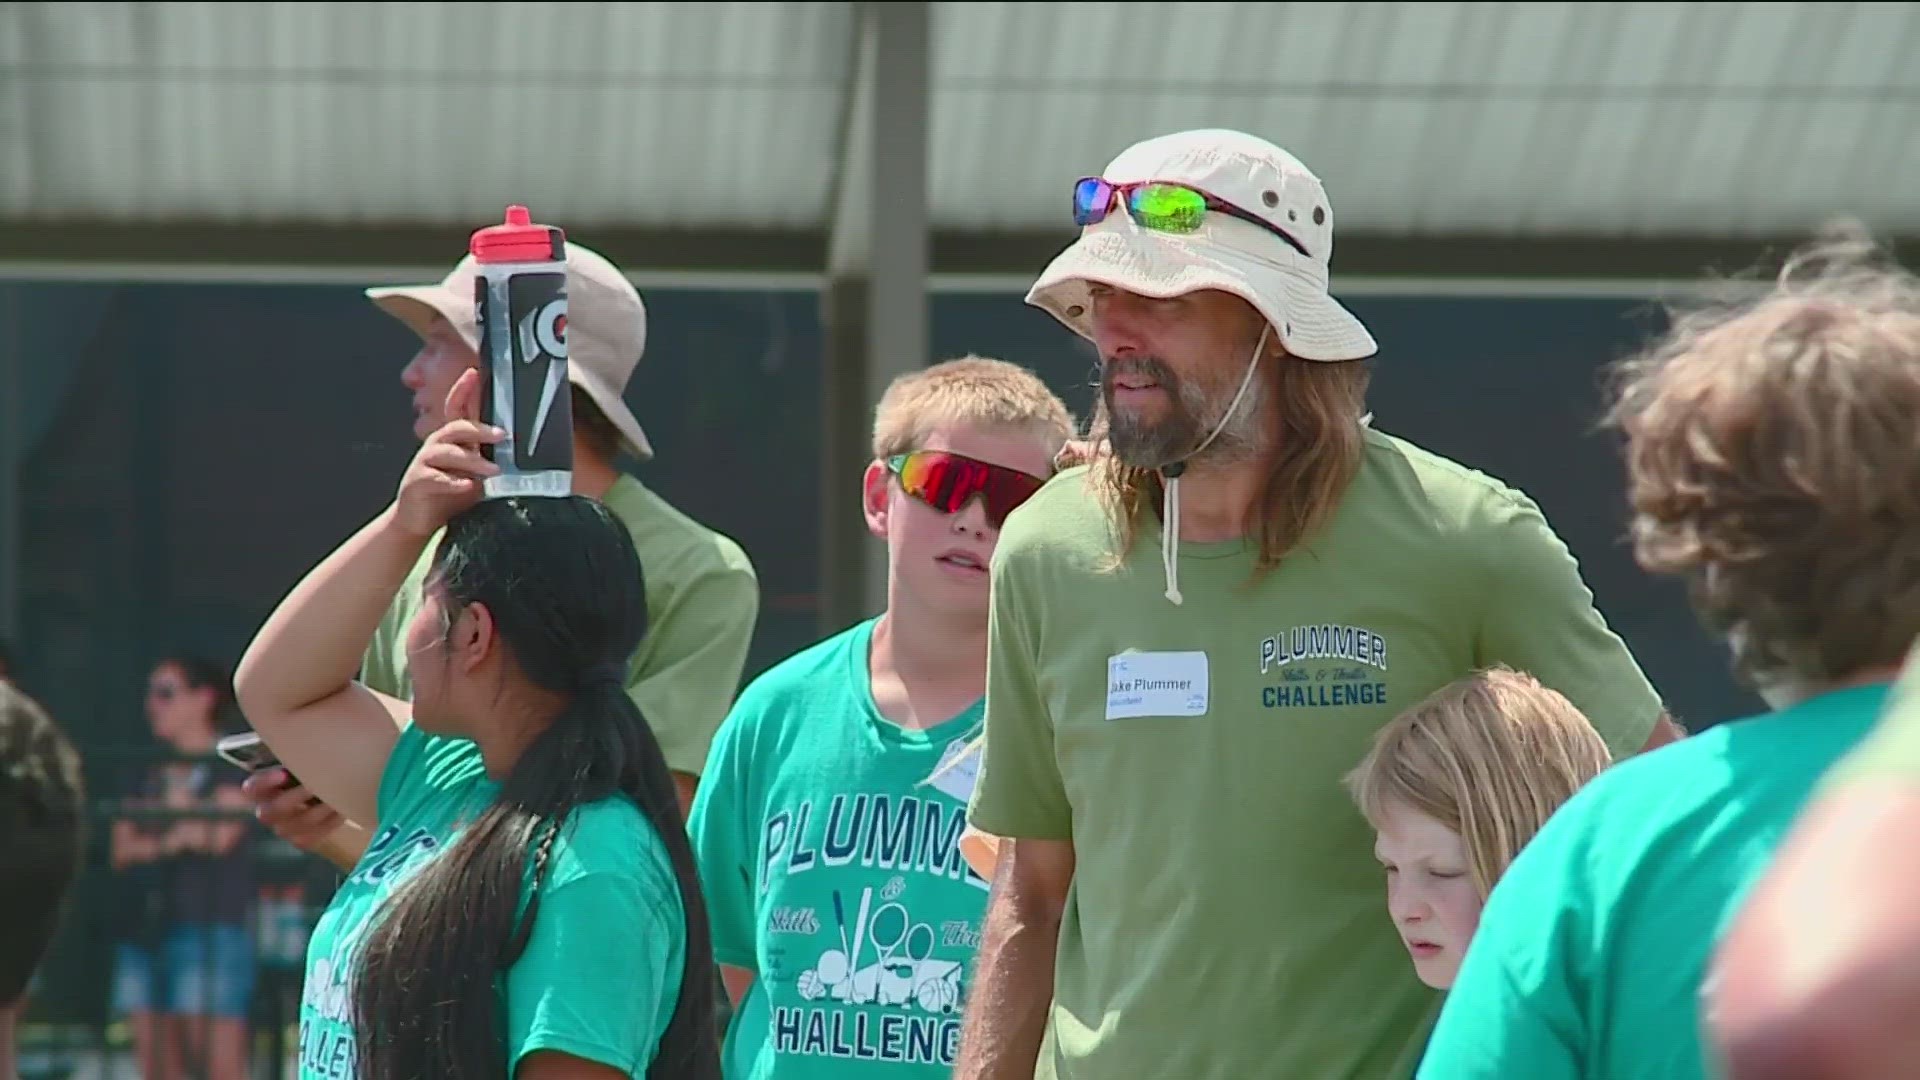 The Plummer Skills & Thrills Challenge is put on each year by the Idaho Youth Sports Commission and brothers Jake and Brett Plummer.